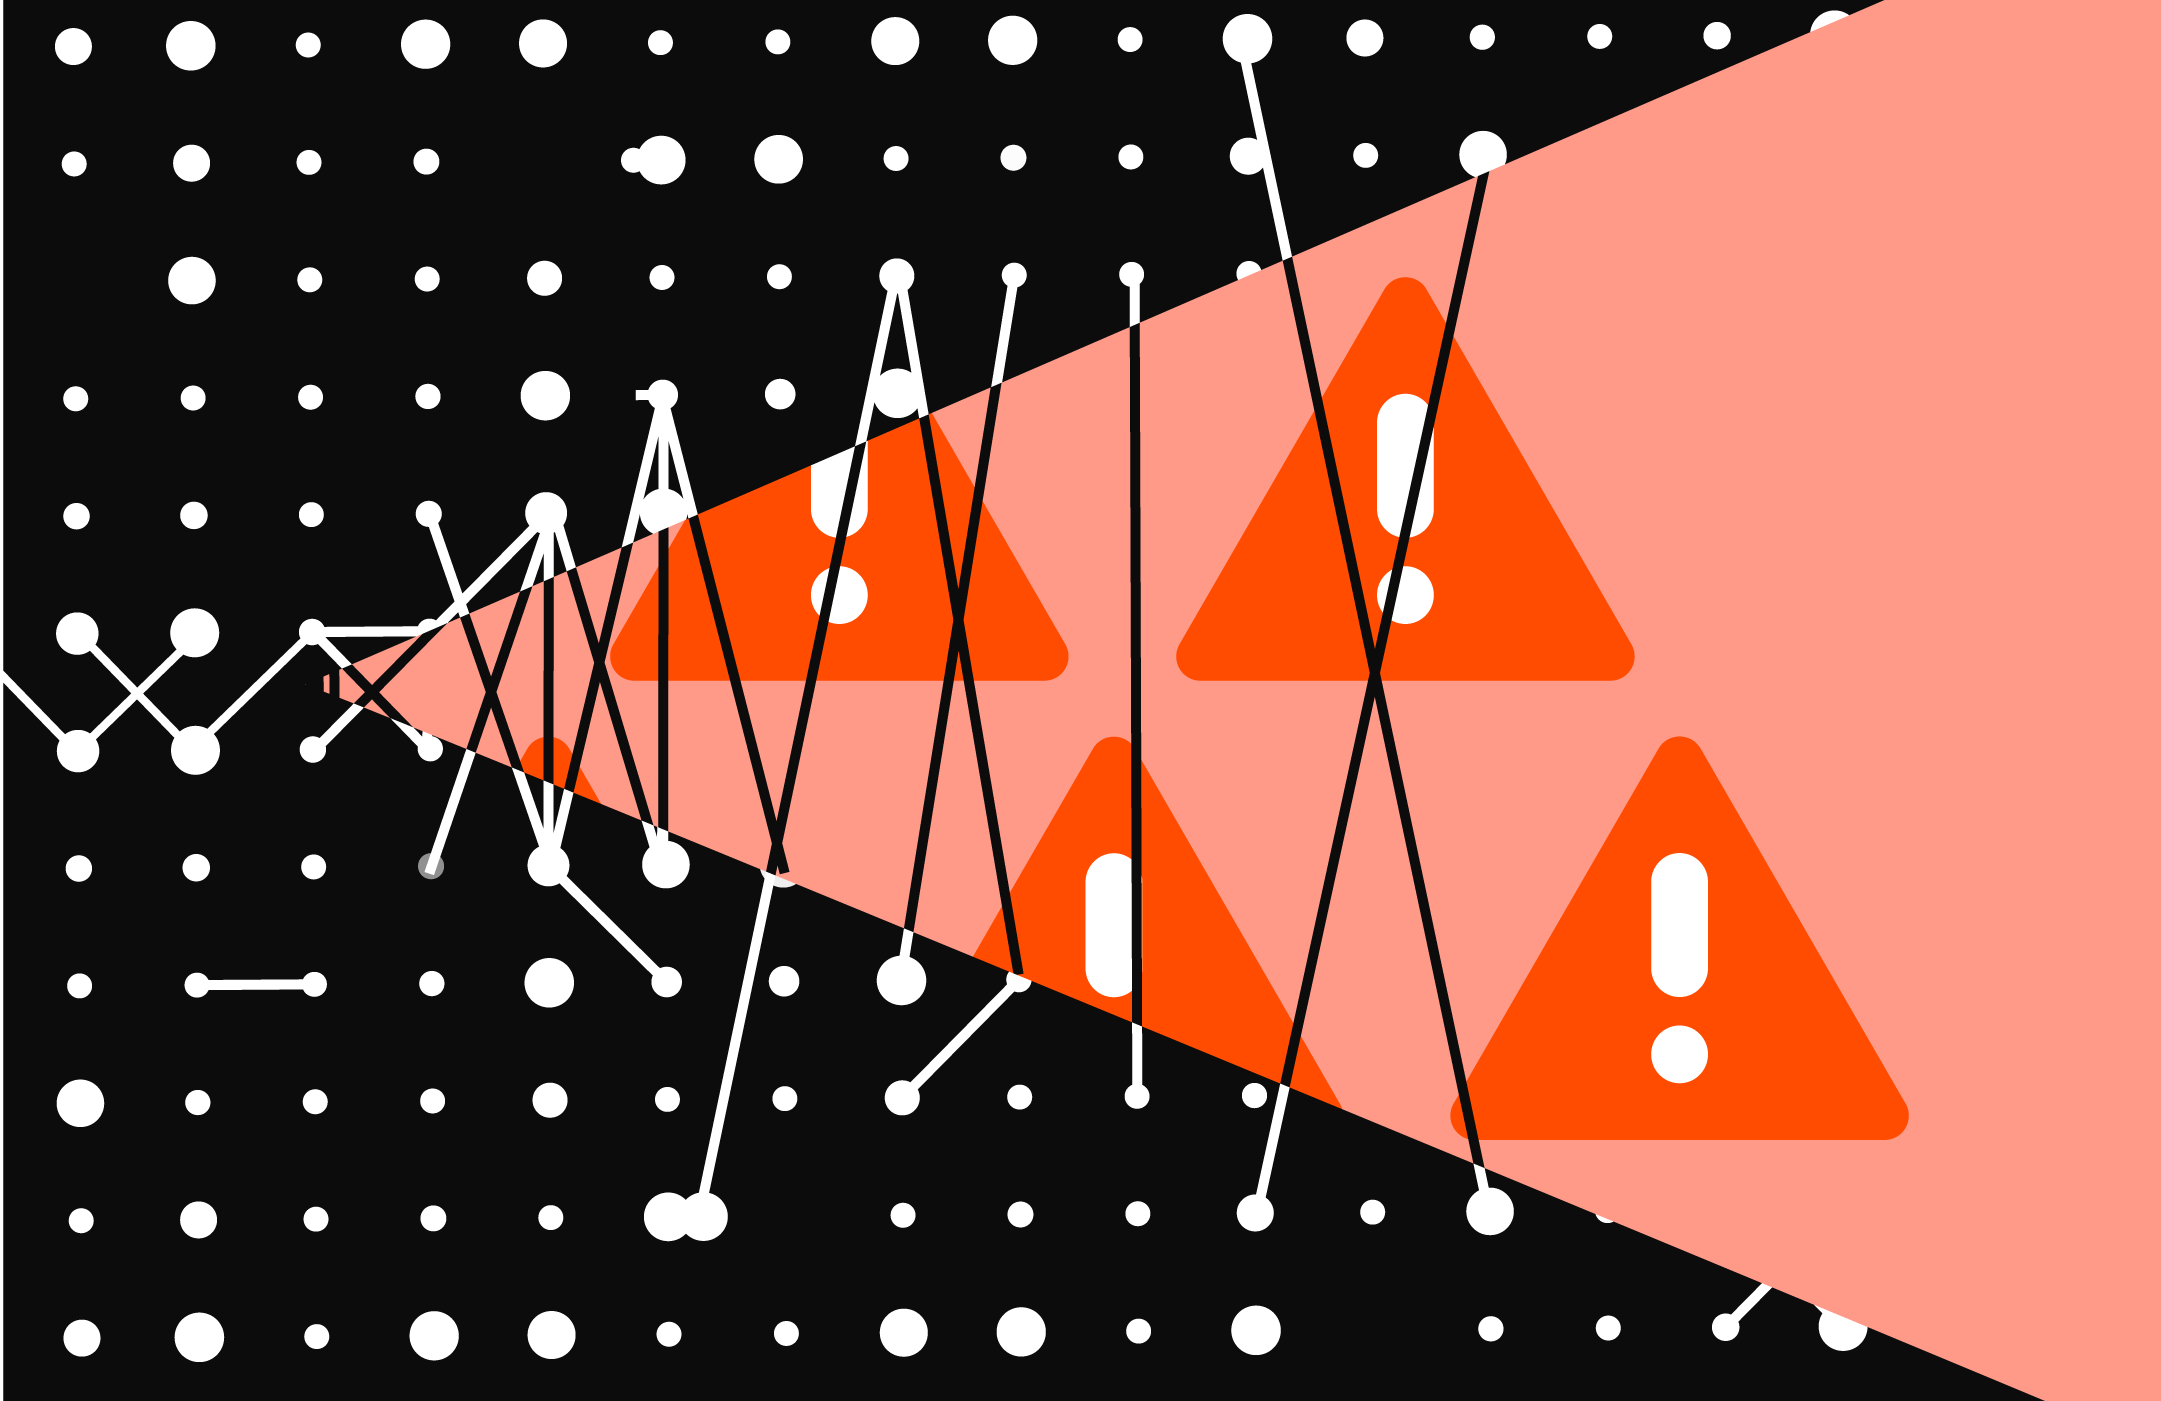 Red triangular icons containing exclamation marks against a black data wave background